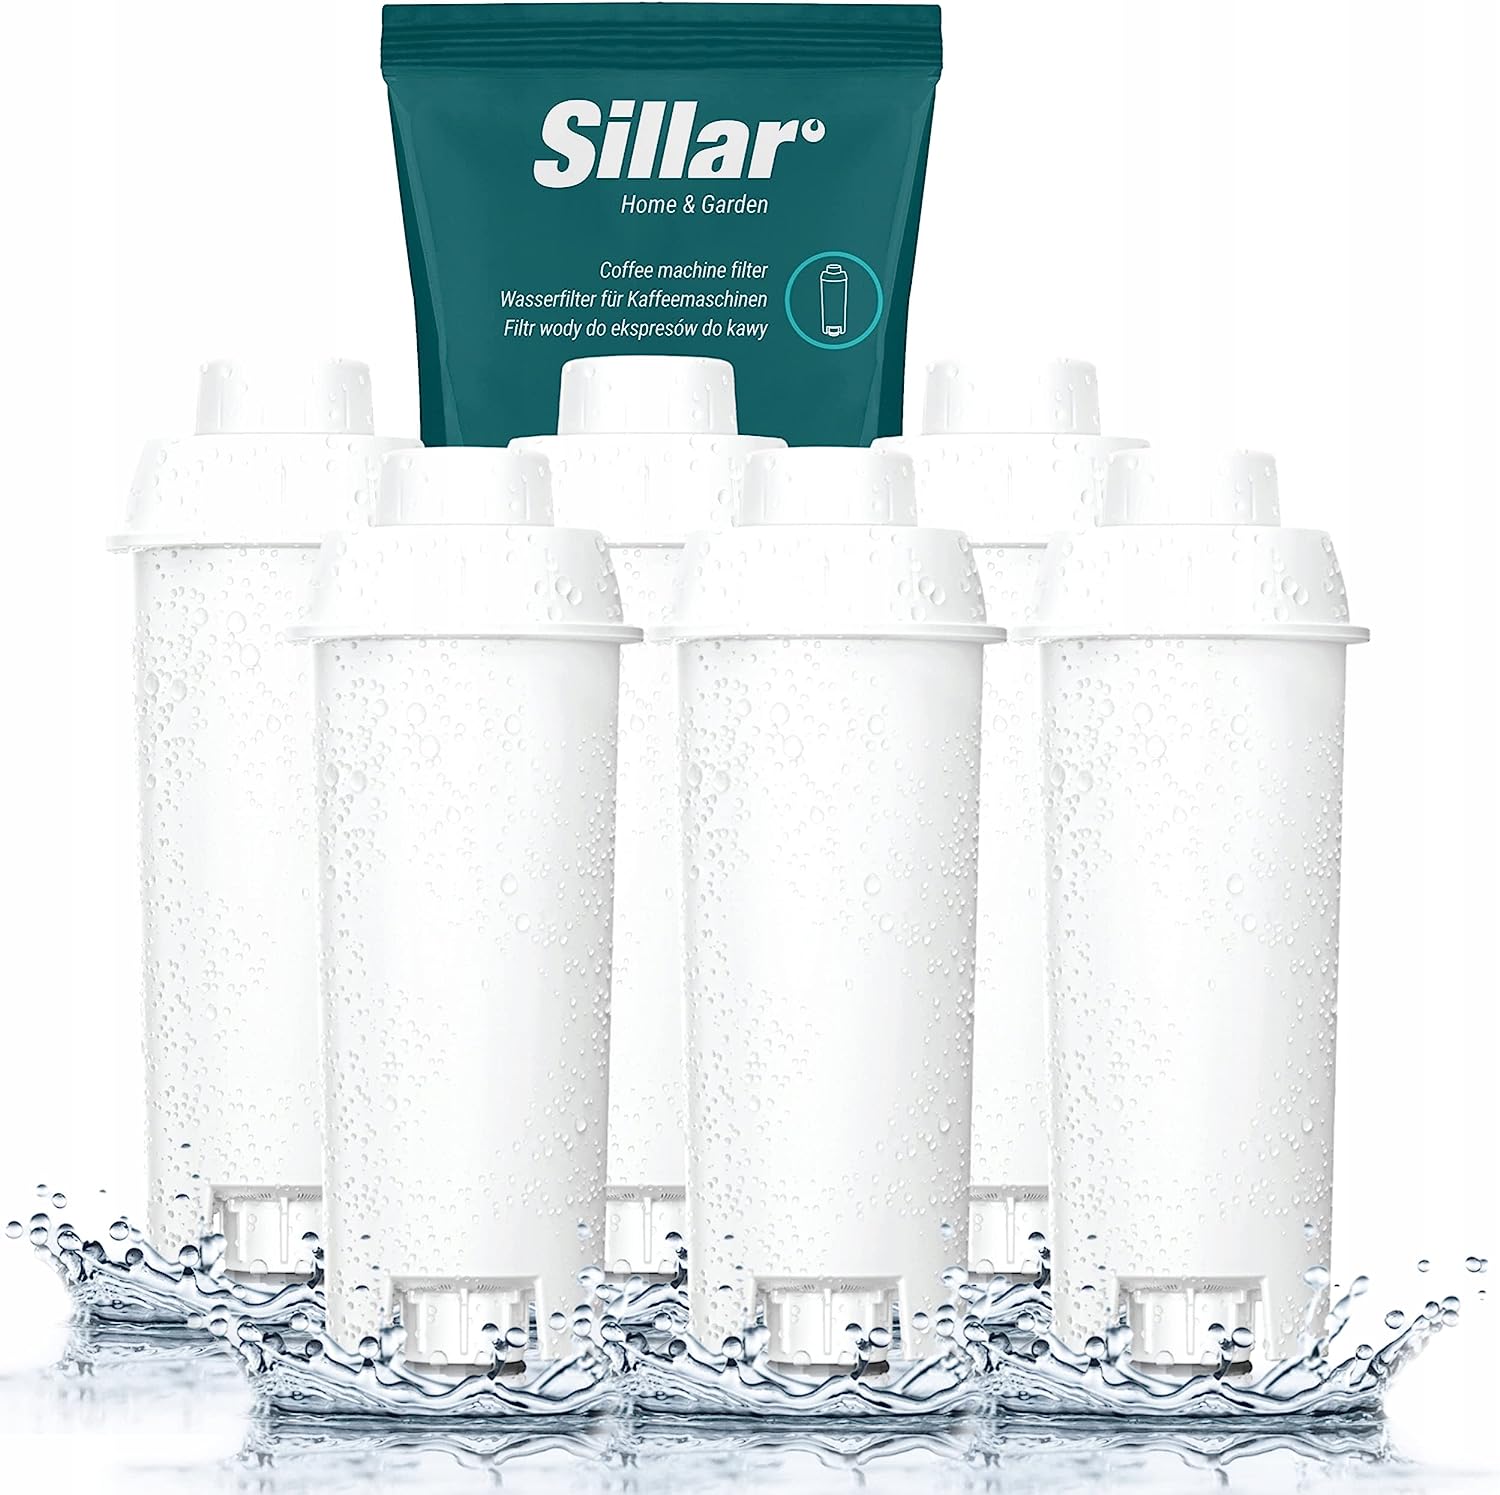 Sillar 6 Pack Water Filter for Delonghi Coffee Machines DLSC002, Ser3017 & 5513292811 - Compatible with Ecam, Esam, Etam Series | Fits Dinamica, Pimadonna | Increases the Life of the Device